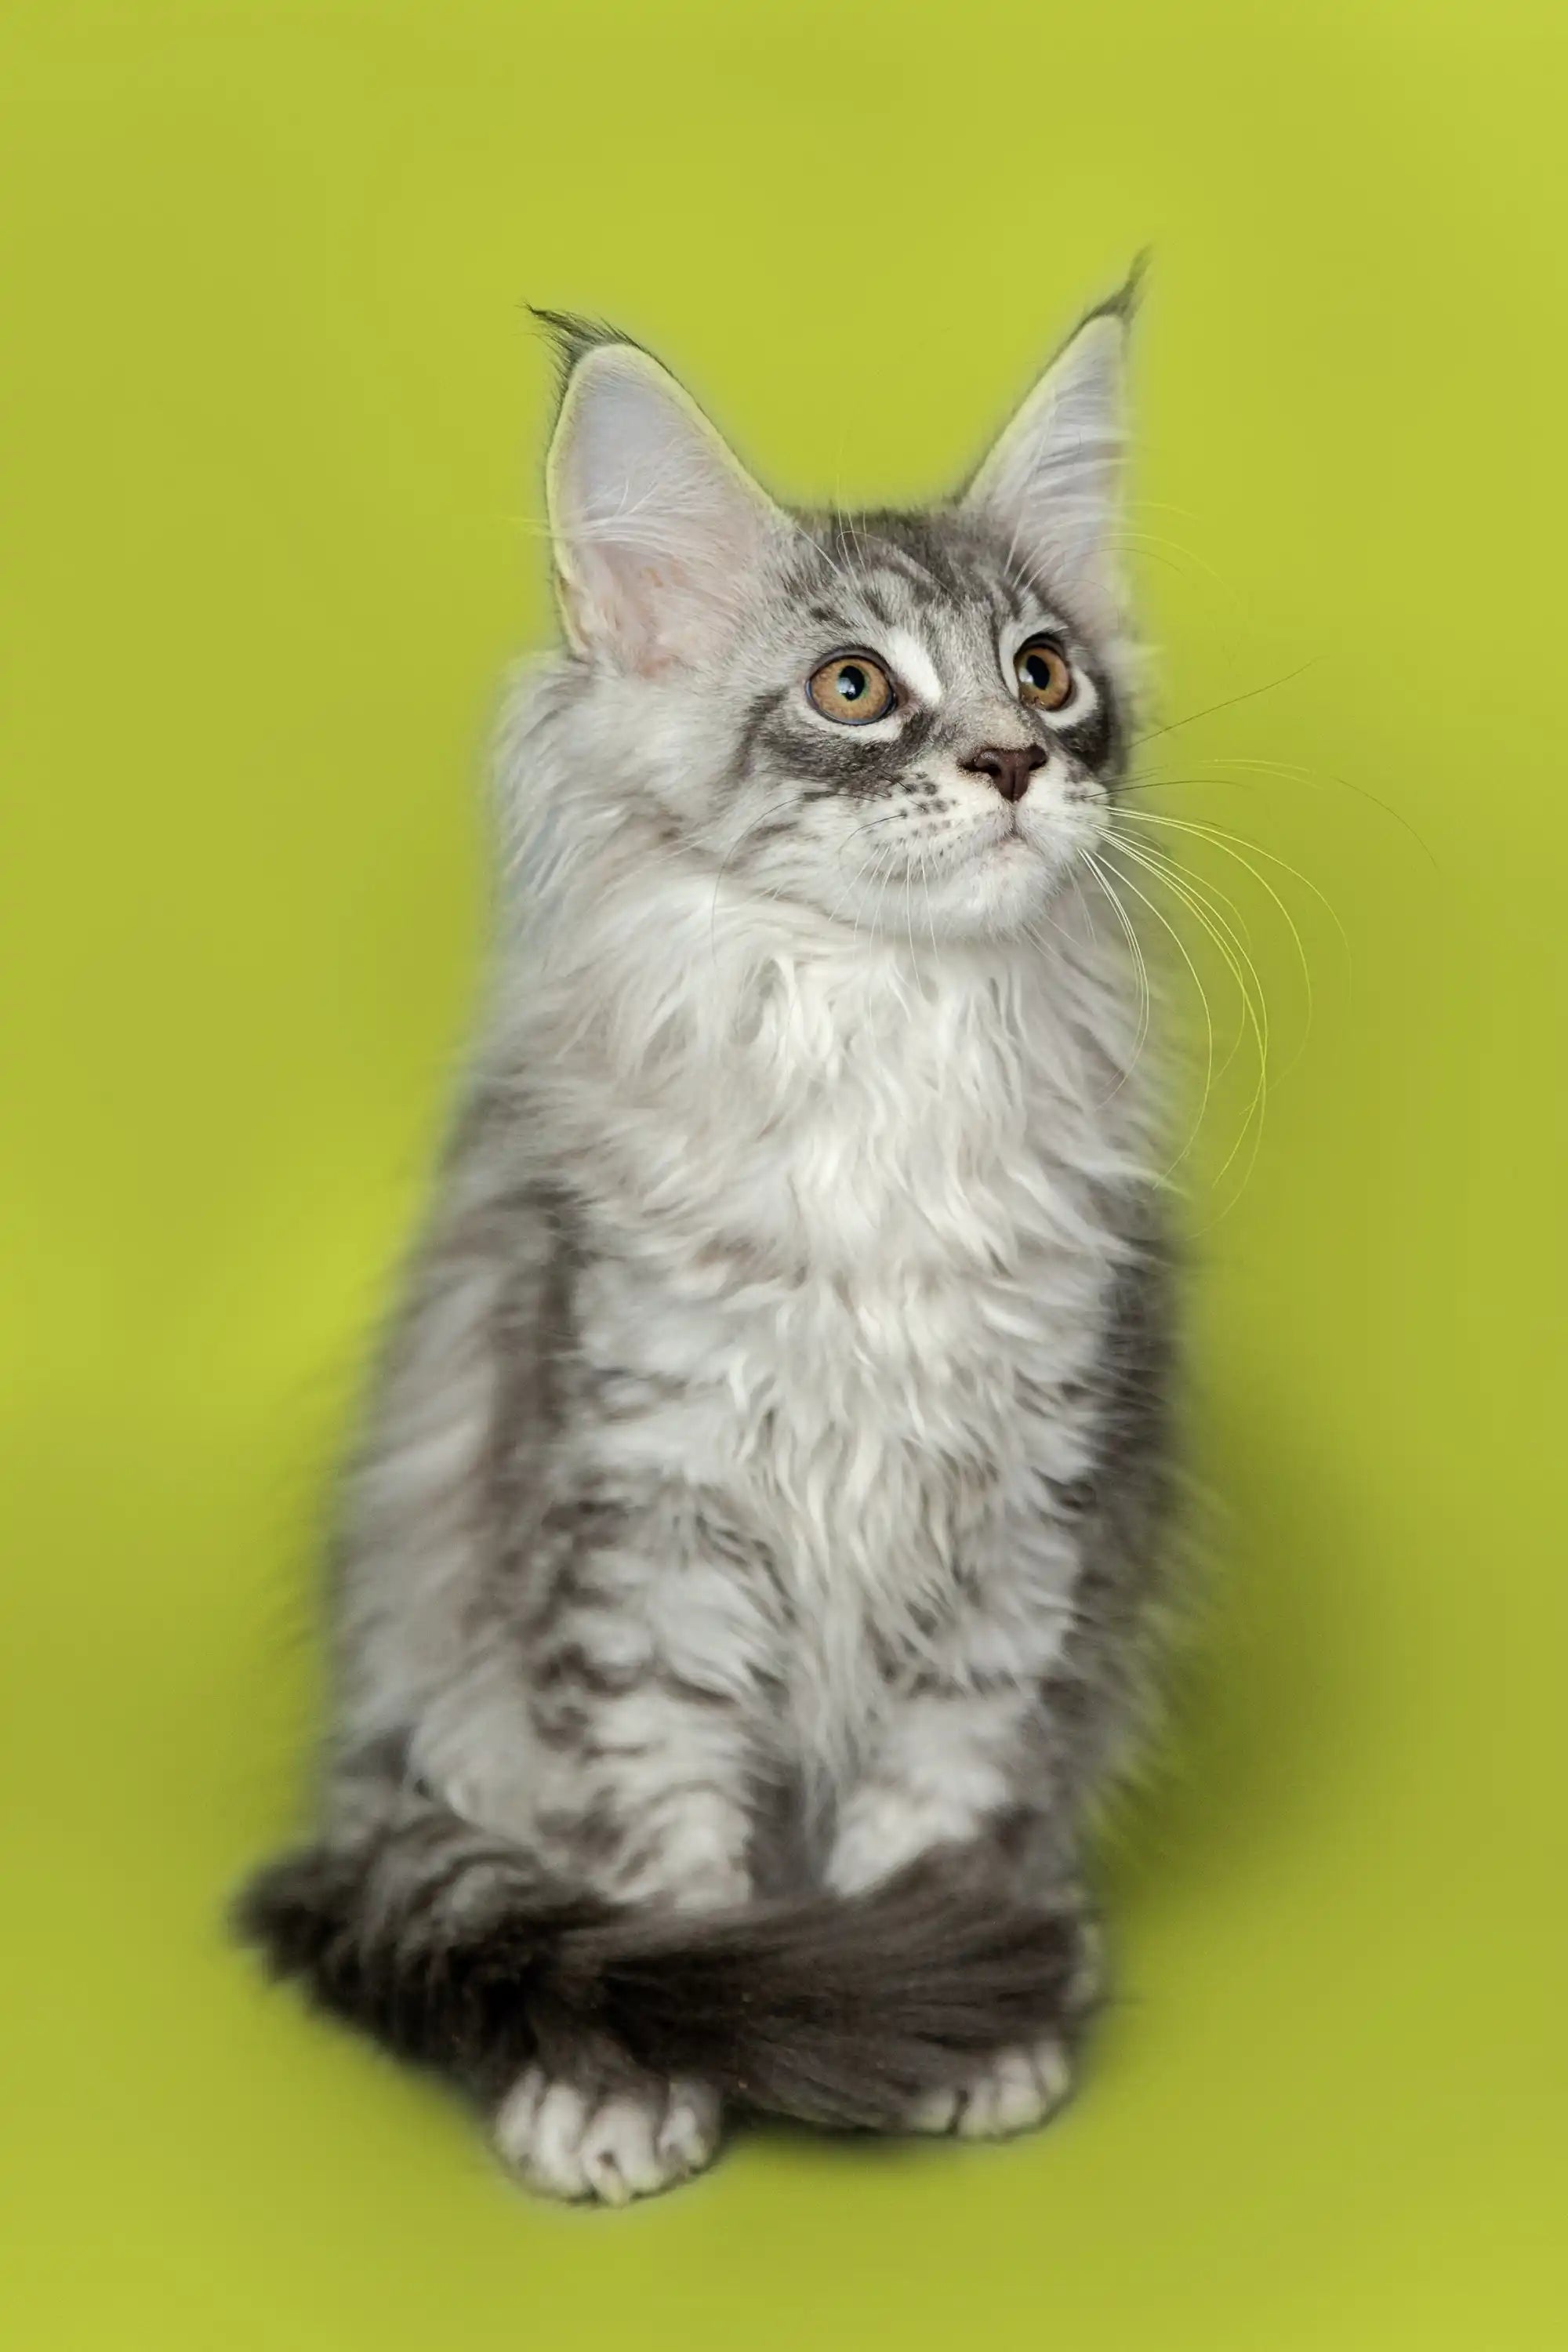 Maine Coon Kittens and Cats for Sale Koda| Kitten